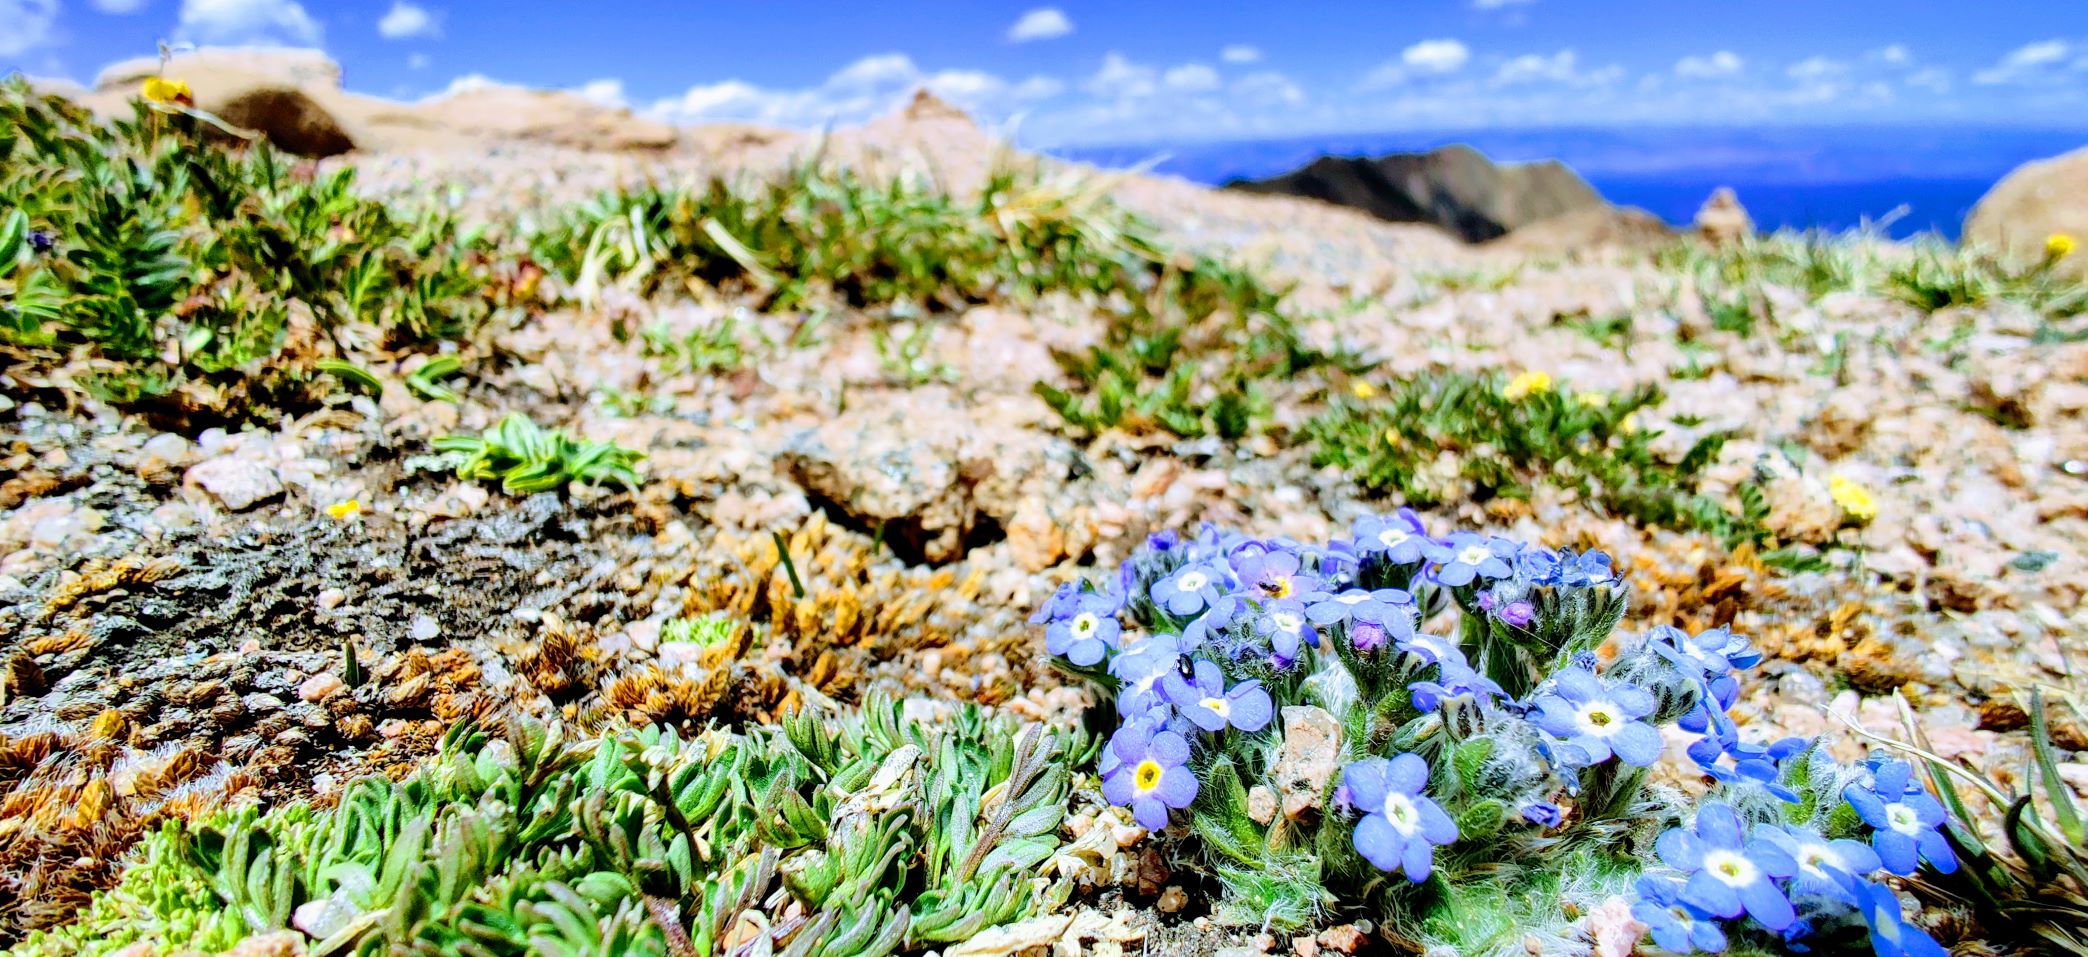 small, blue wildflowers bloom high above a mountain valley in the distance